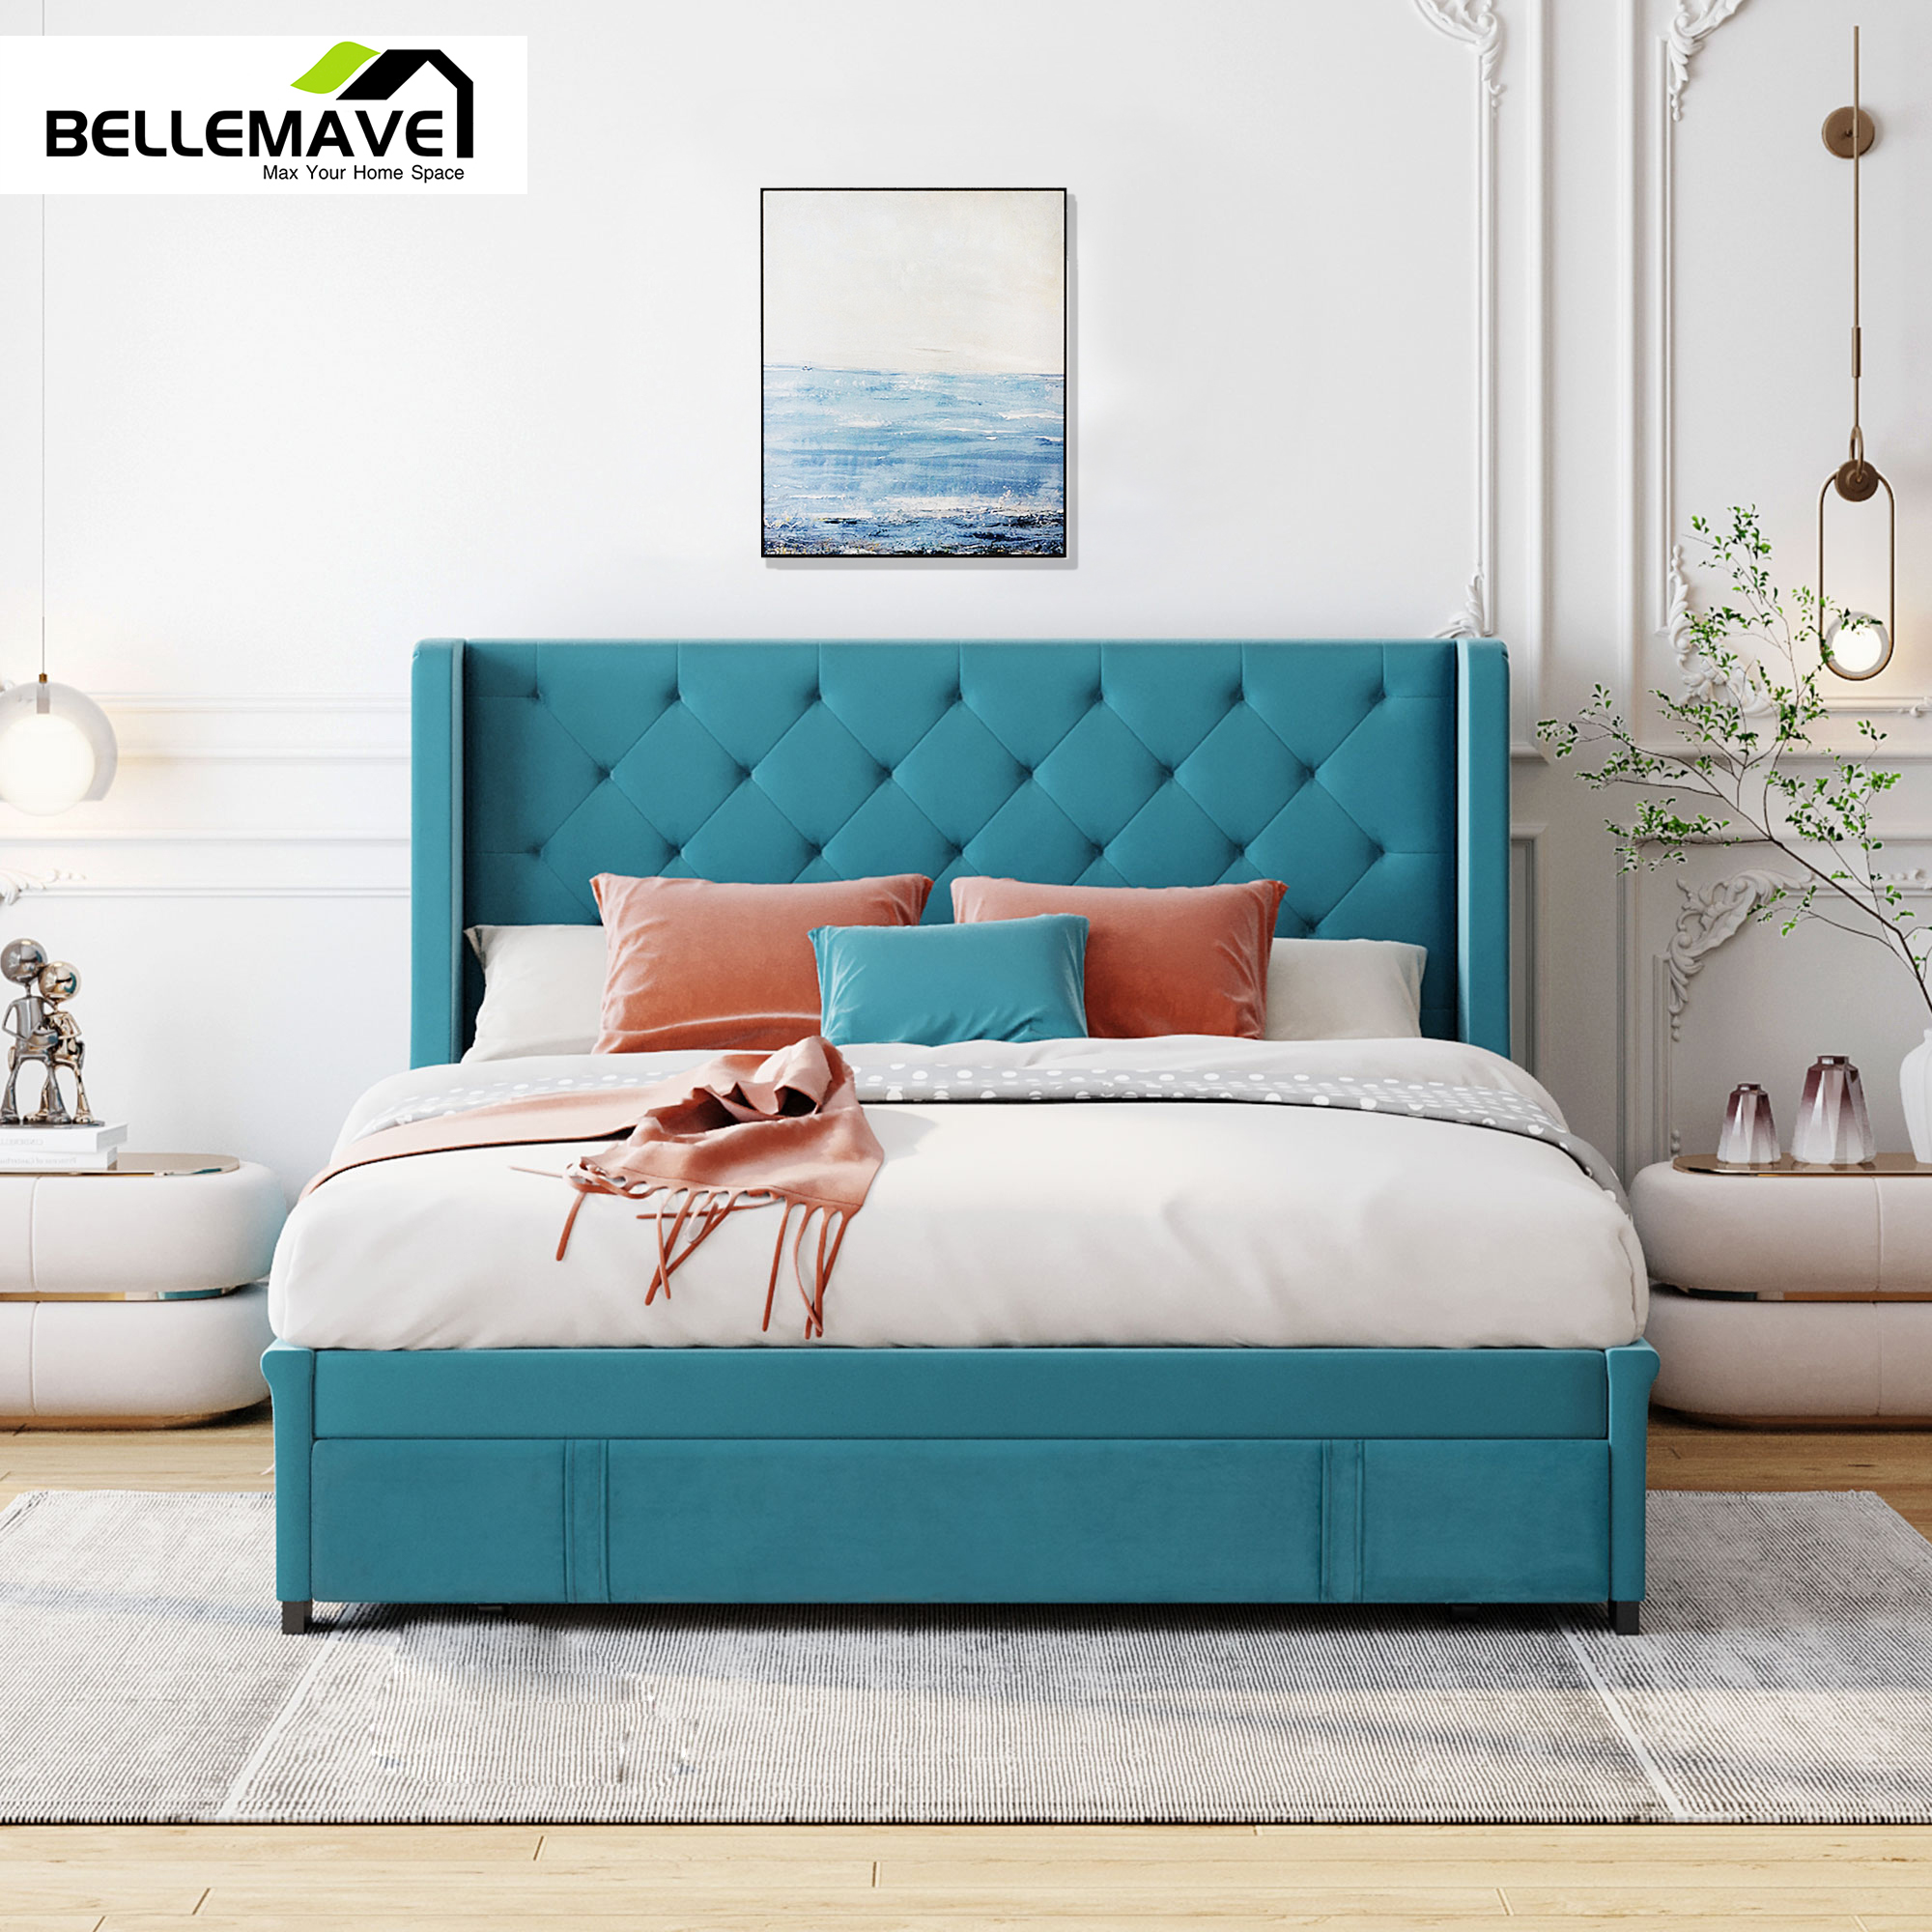 Bellemave Queen Upholstered Platform Bed Frame with Drawer, Storage Bed With Tufted Wingback Headboard, Blue - image 1 of 7